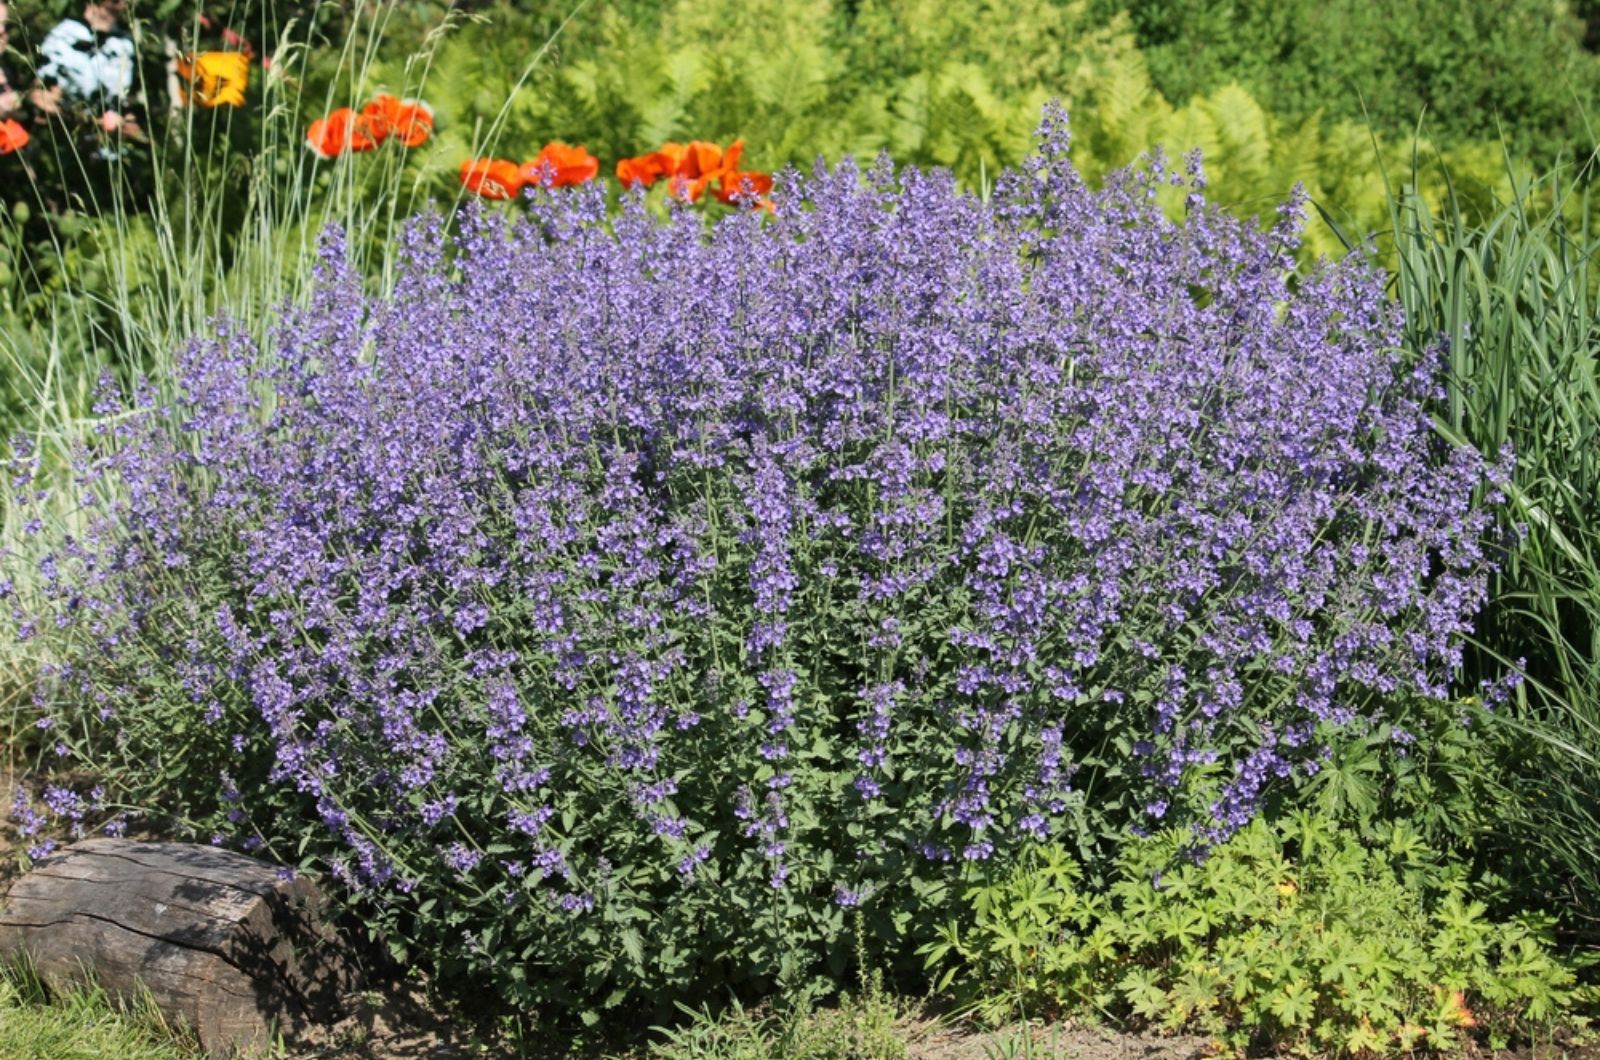 the bush of catmint